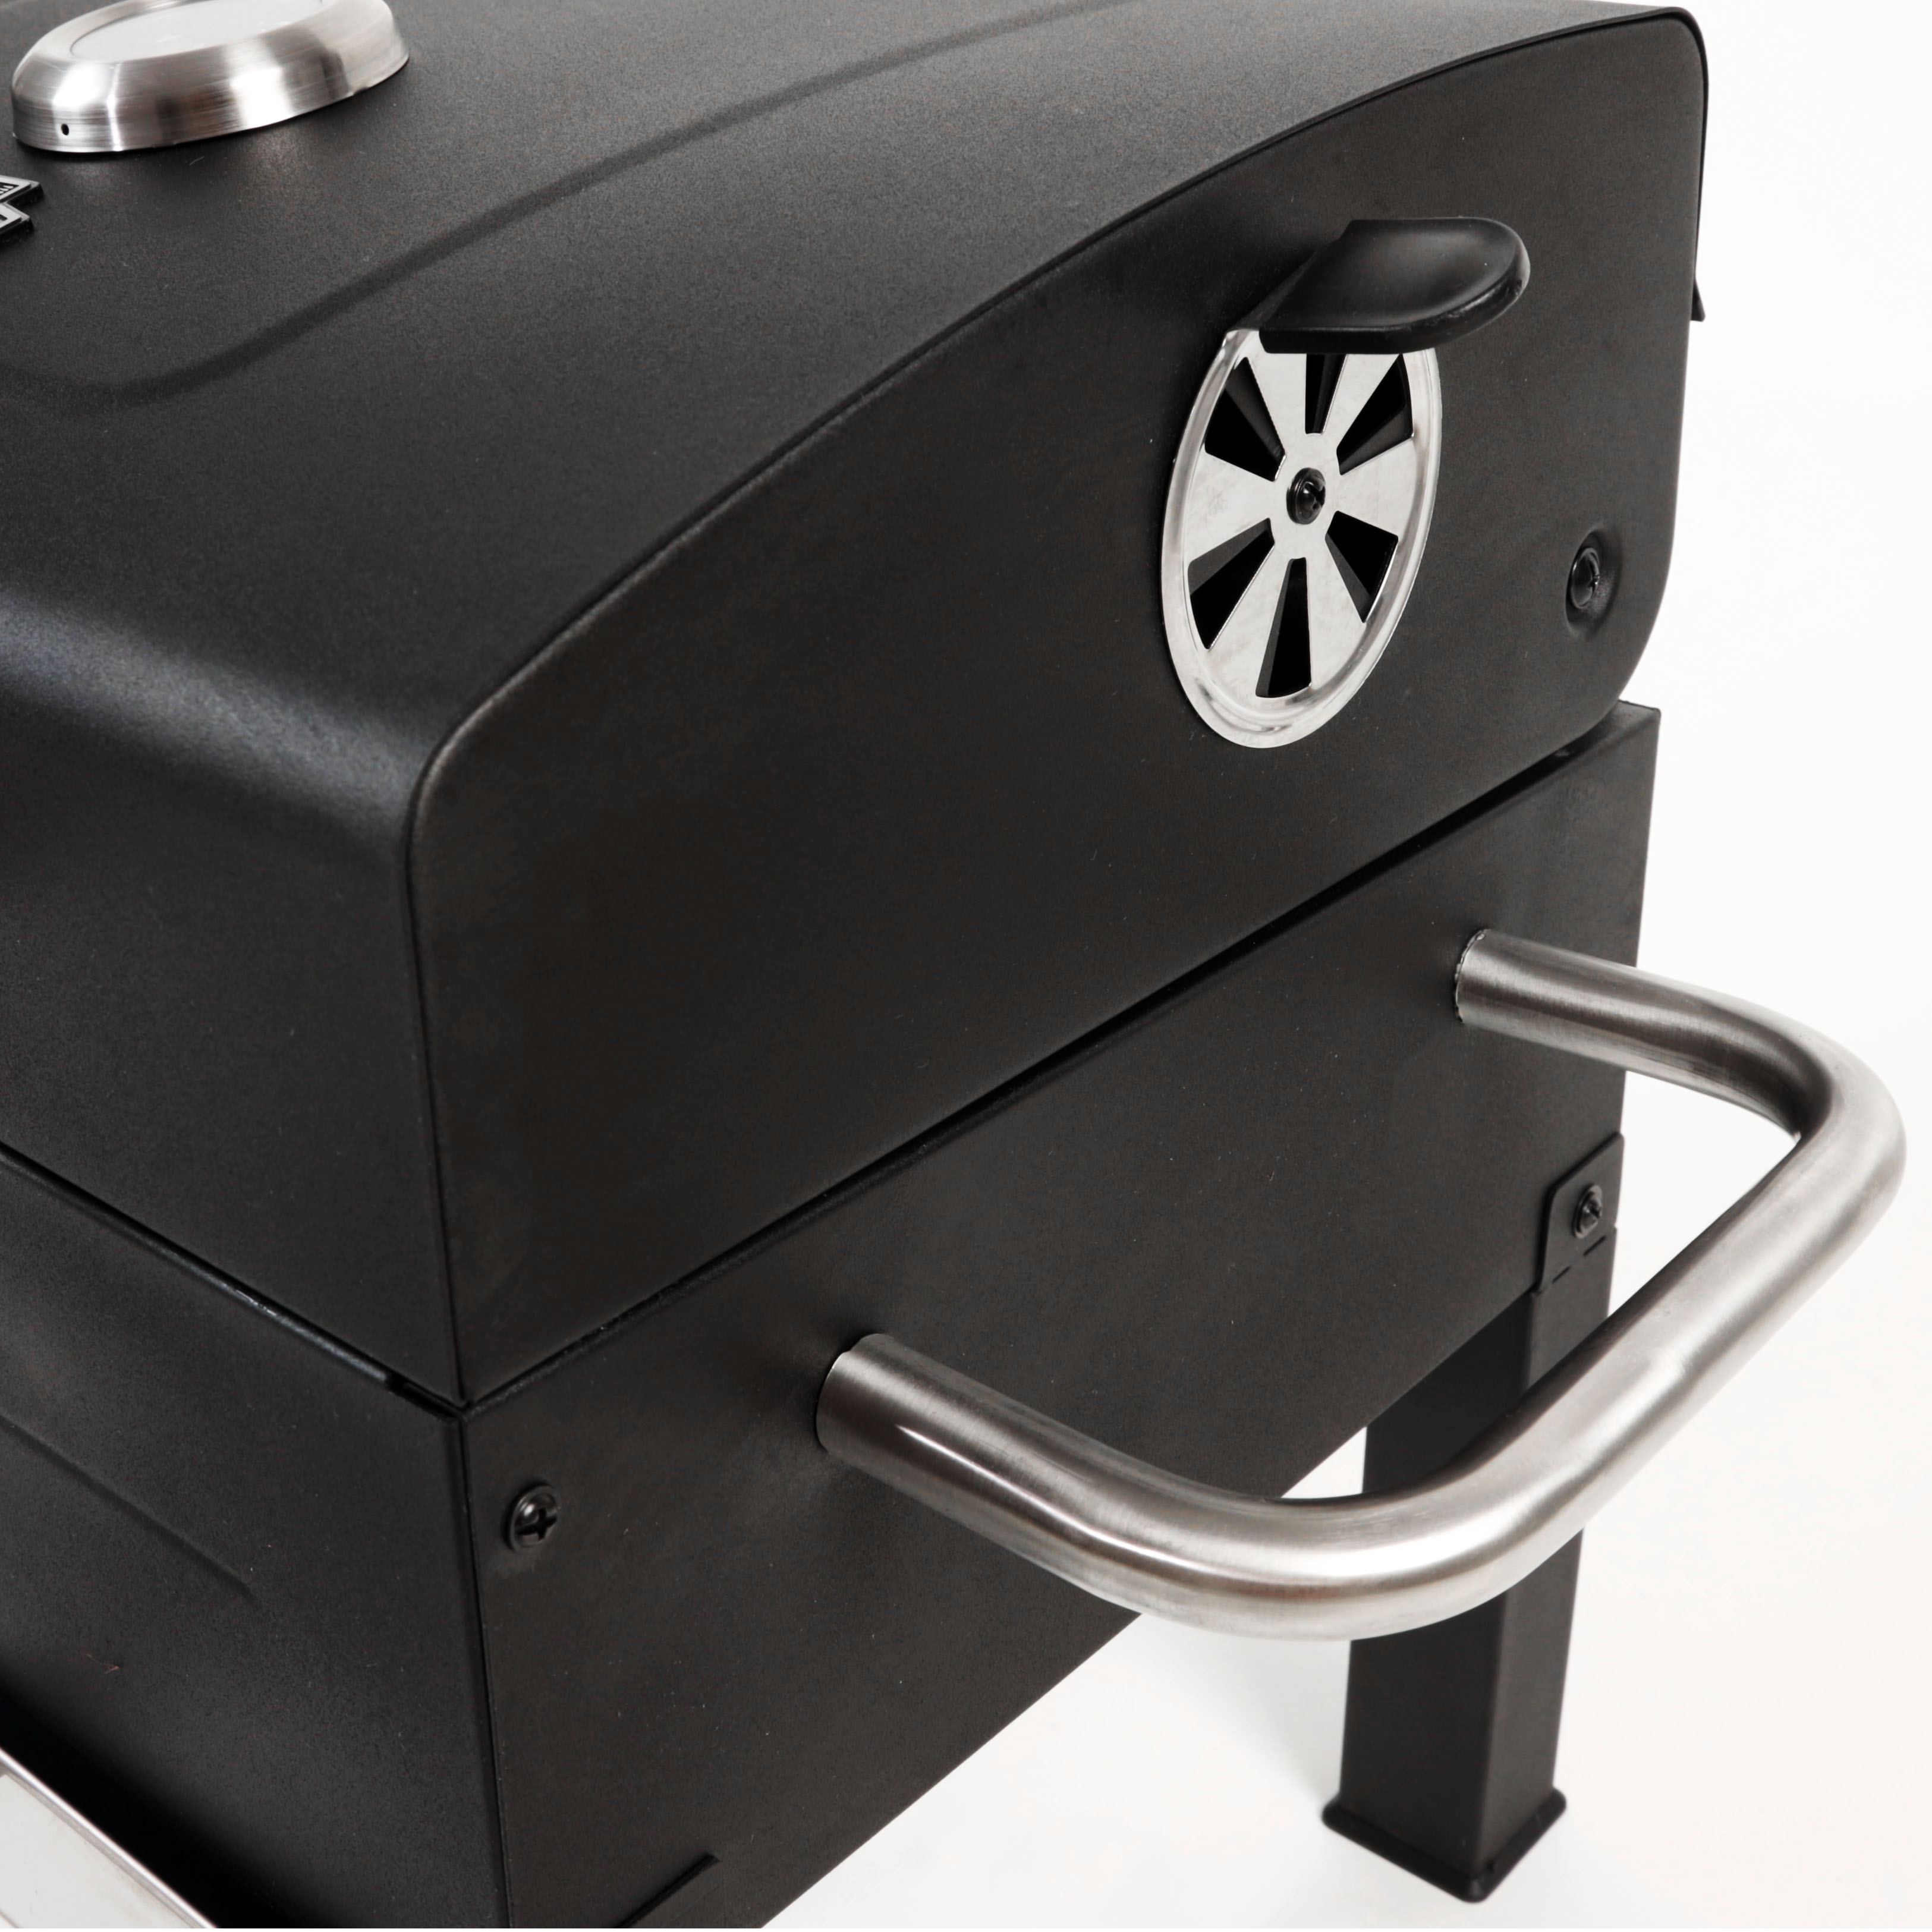 Expert Grill Premium Portable Charcoal Grill, Black and Stainless Steel - image 12 of 18